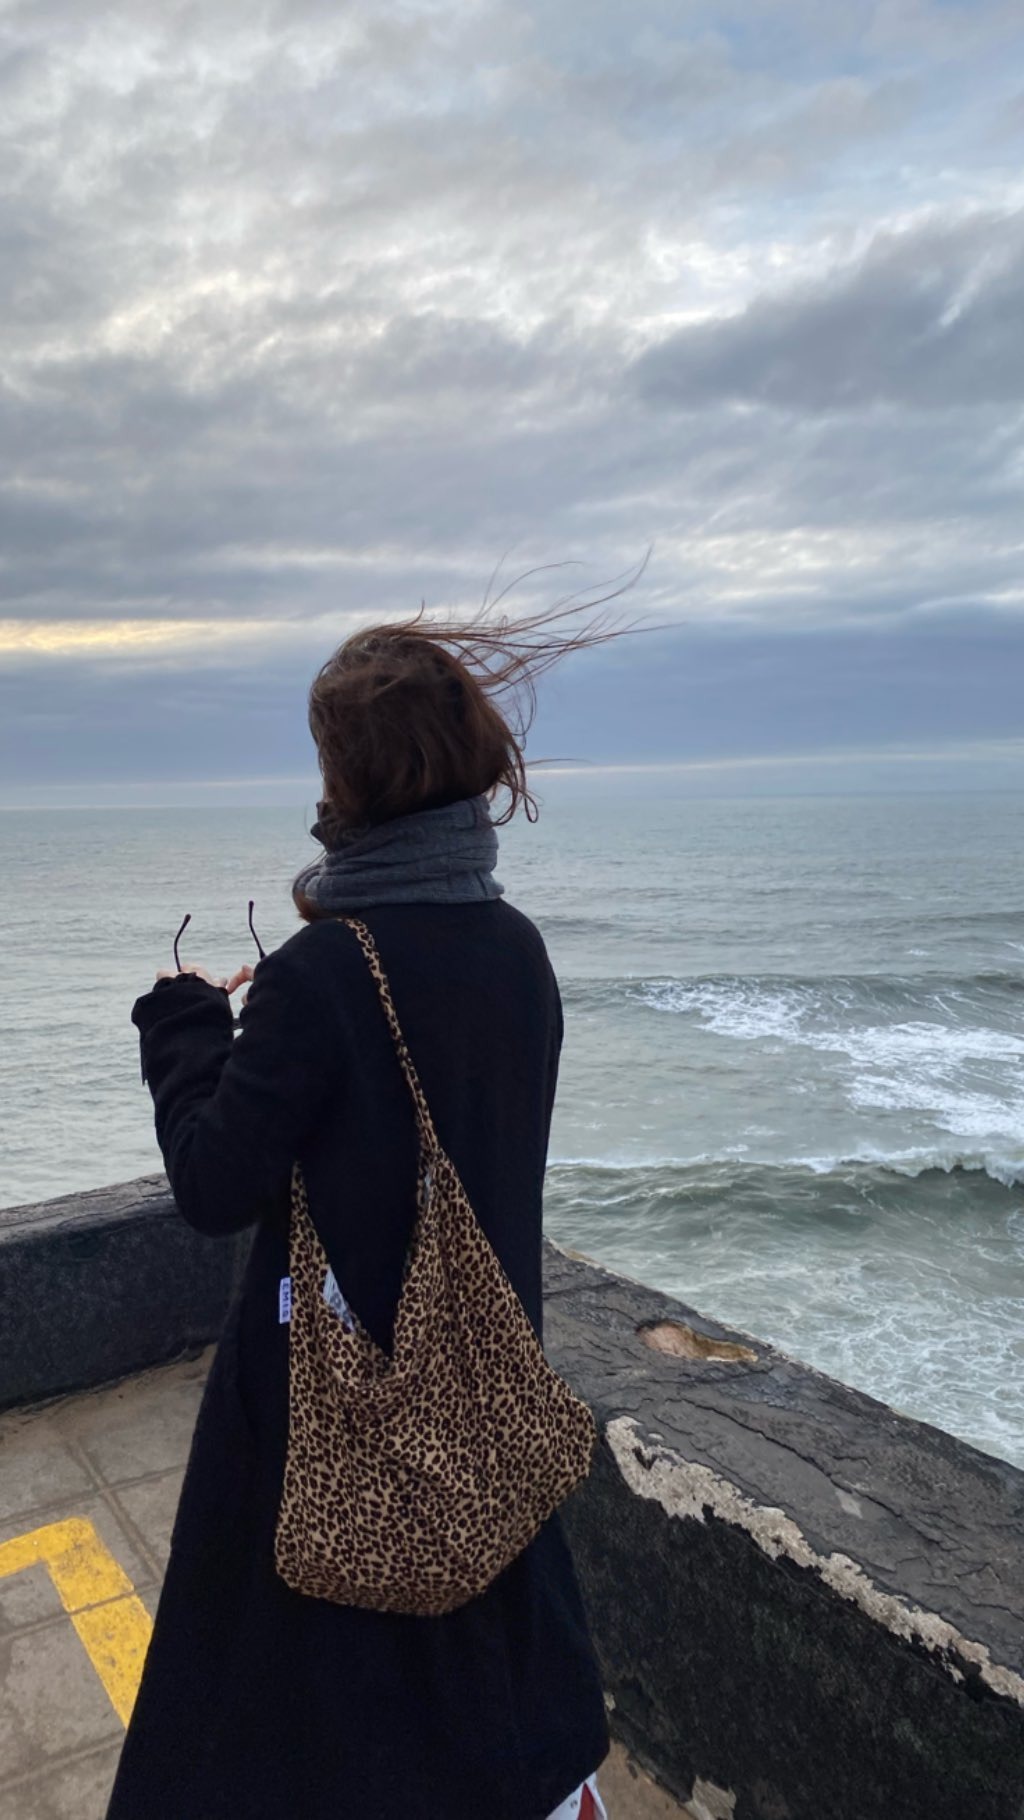 Seoul = = Actor Song Hye-kyo reveals Portugal Travel figureSong Hye-kyo released photos and videos of Portugal Travel through his Instagram story on the 23rd.Inside the picture is Song Hye-kyos Model, Back View, looking at the sea from Portugals Nazareth beach.Song Hye-kyo is in the wind in this photo, matching a leopard-print bag with a black coat.Model, Back View alone is shooting out an extraordinary Aura.Meanwhile, the recent recombination of Song Hye-kyo and Song Joong-ki has spread among Chinese netizens, and Chinese media have also been reported.It comes as a photo of Song Hye-kyo appears to have re-engineered her wedding ring.The picture of the problem spreading in the China portal Baidu is a picture photo recently released by a magazine.On the 17th (local time), China City of Taiwan reported on the reunion of the two people under the title of Song Hye-kyo marriage ring again to be converted into a reuniting of Song Song couple.China Shibo explained the background of the reunion, saying, There are still many people who want to see the reunion of the two people.Baidu also reported that the two were zero about the possibility of a reunion, not certain about the song Hye-kyo reunion, but added, The scene where the two came together (in the drama) is alive in the viewers mind in an idol-like manner.Song Hye-kyo and Song Joong-ki married in October 2017 after meeting as Actor, the lead actor in the drama Dawn of the Sun, which aired in 2016.However, after a year and nine months of marriage, he was dismissed in June, and after the divorce settlement at the end of July, he finished the divorce process without alimony or property division.